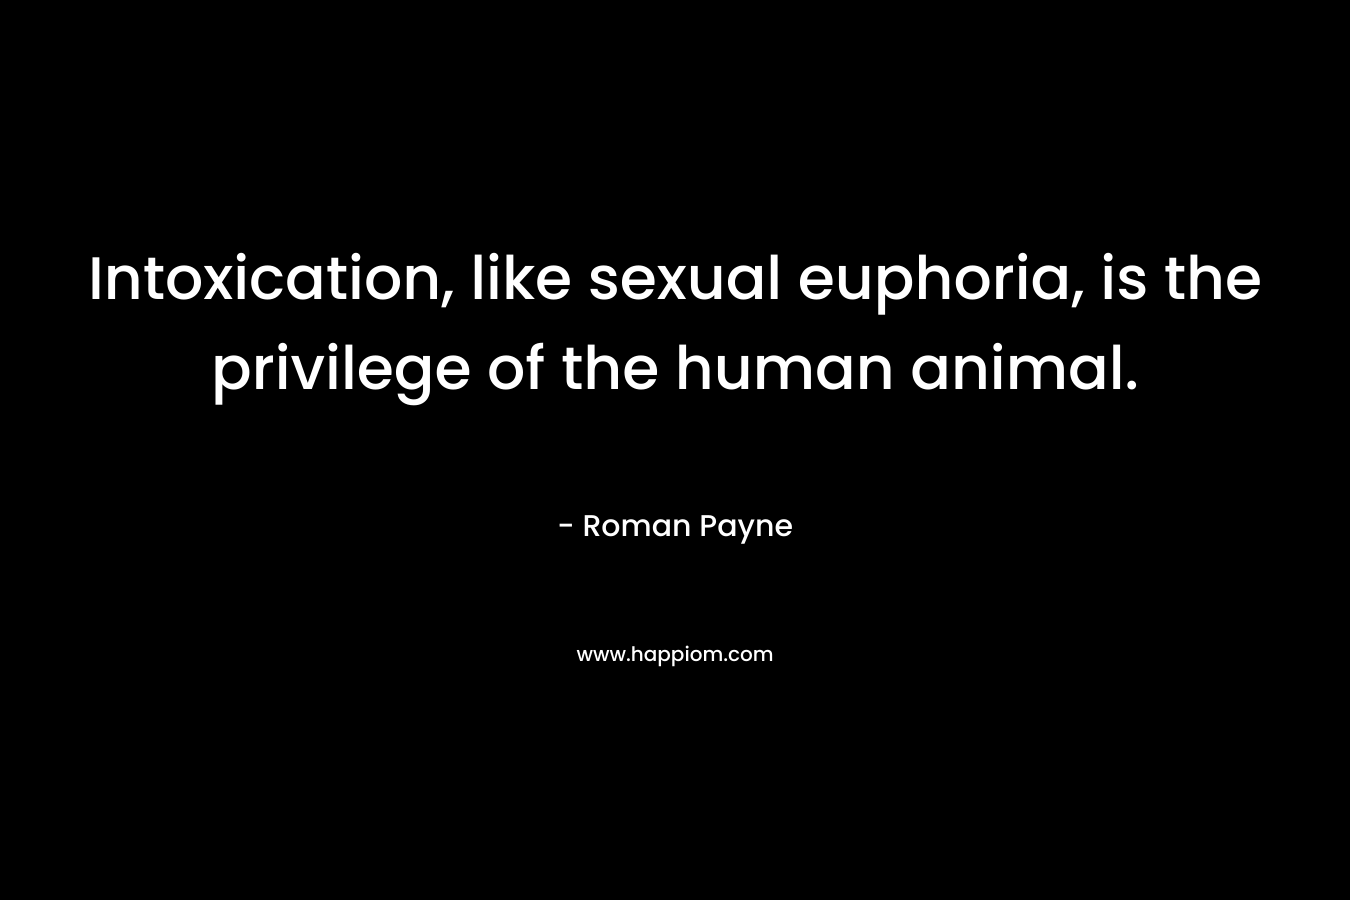 Intoxication, like sexual euphoria, is the privilege of the human animal.